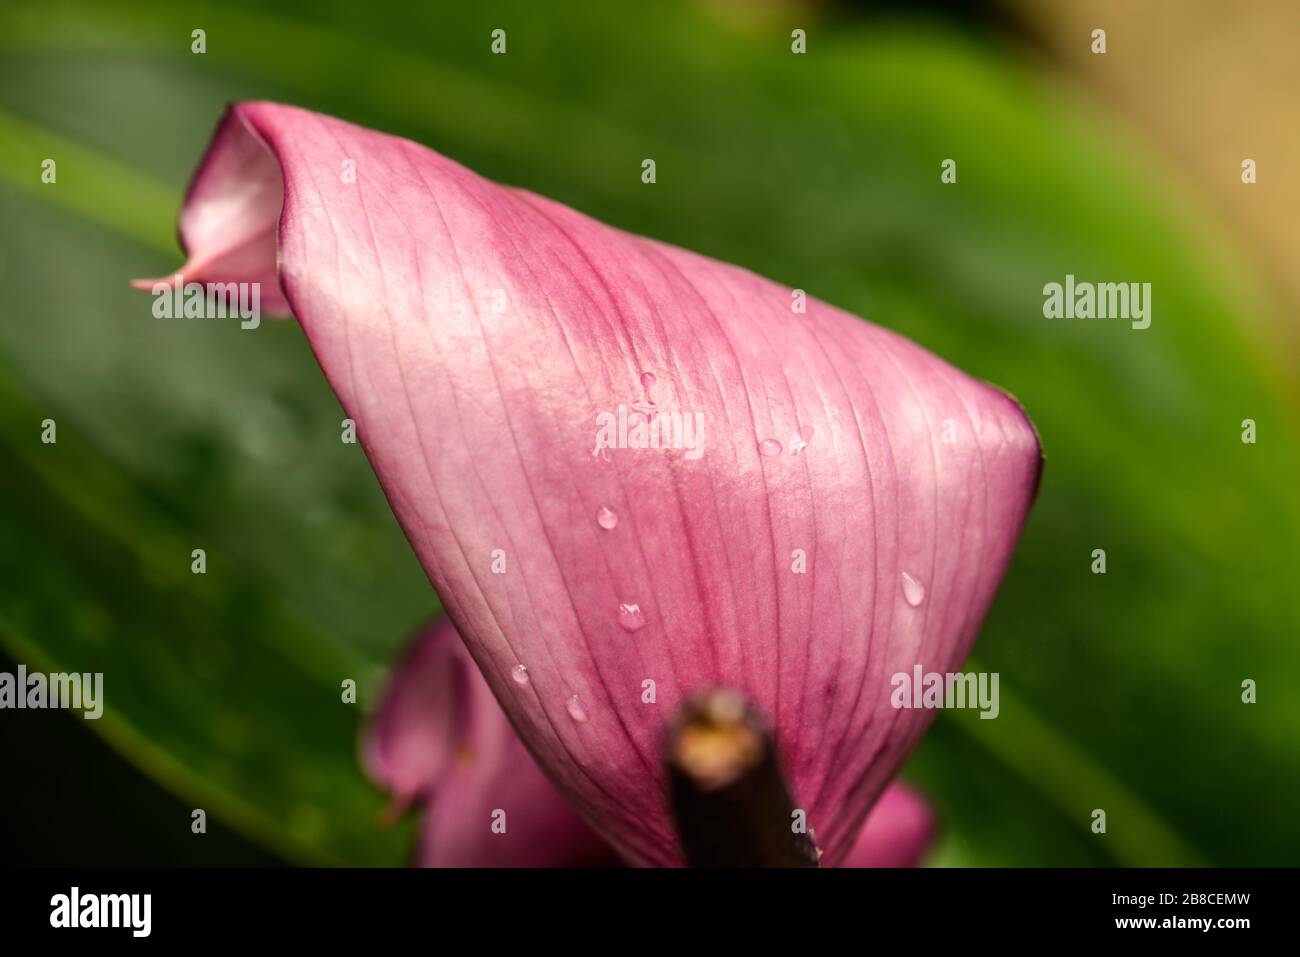 Isolated pink flower petal with water droplets against a large green leaf. Stock Photo